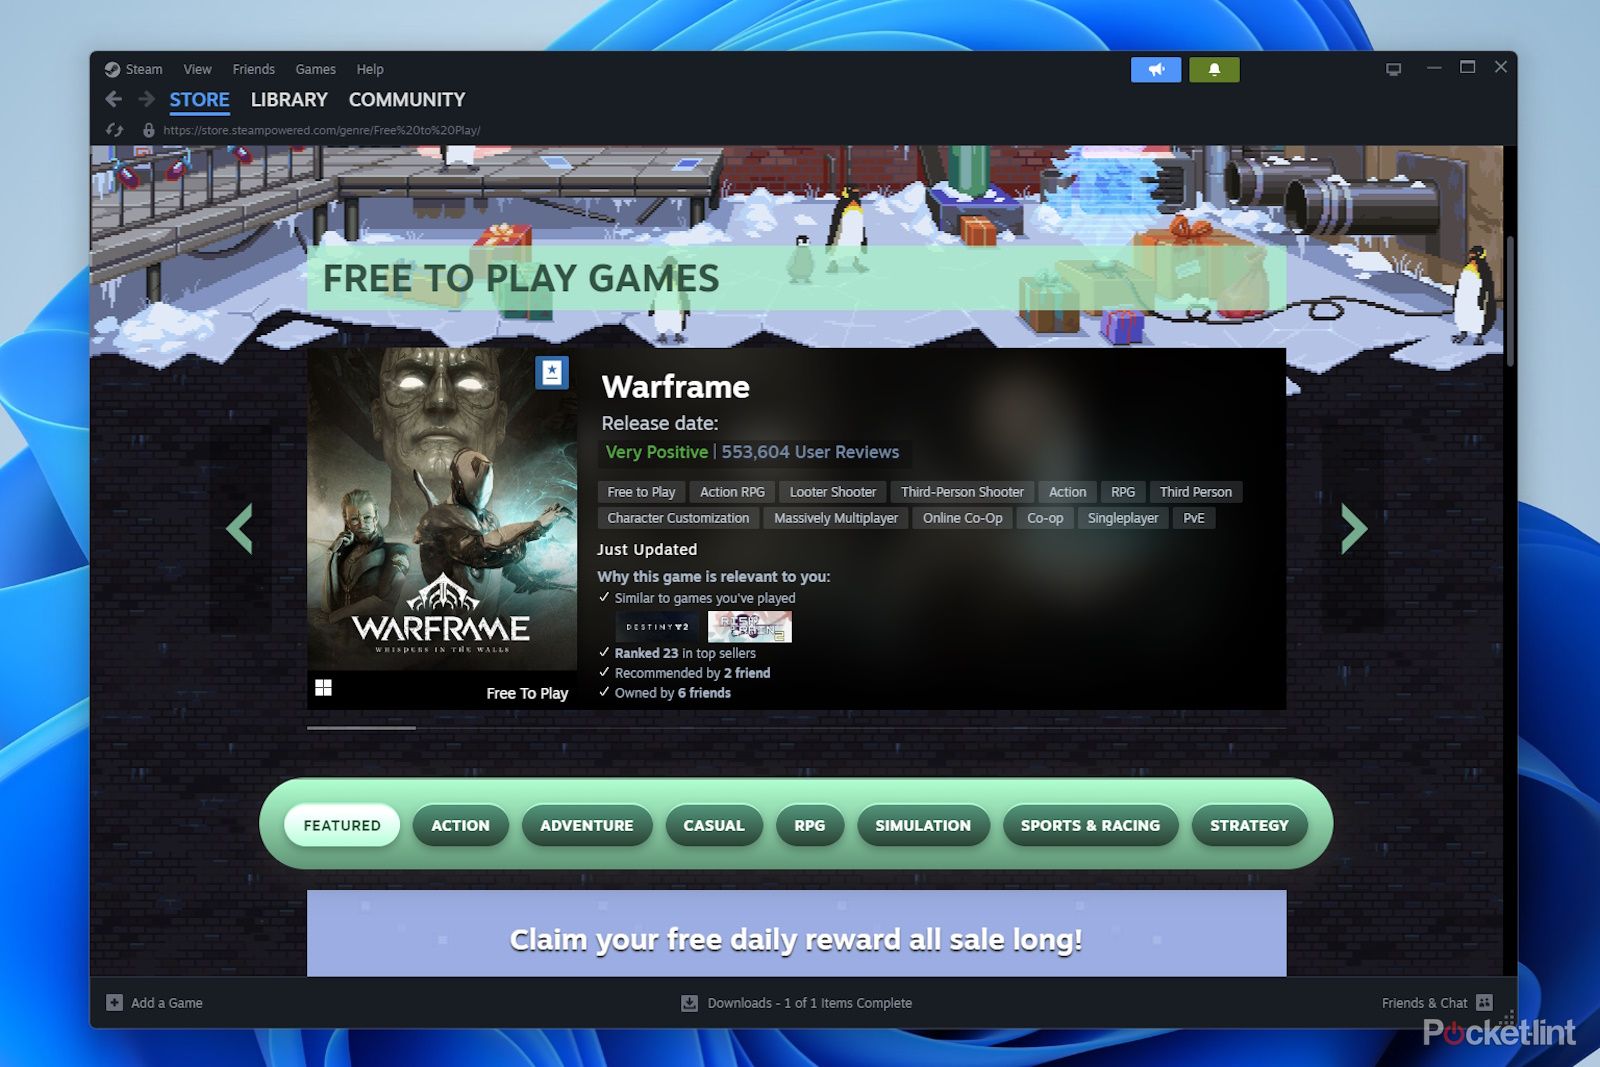 Free Steam games page in the Steam client on Windows desktop